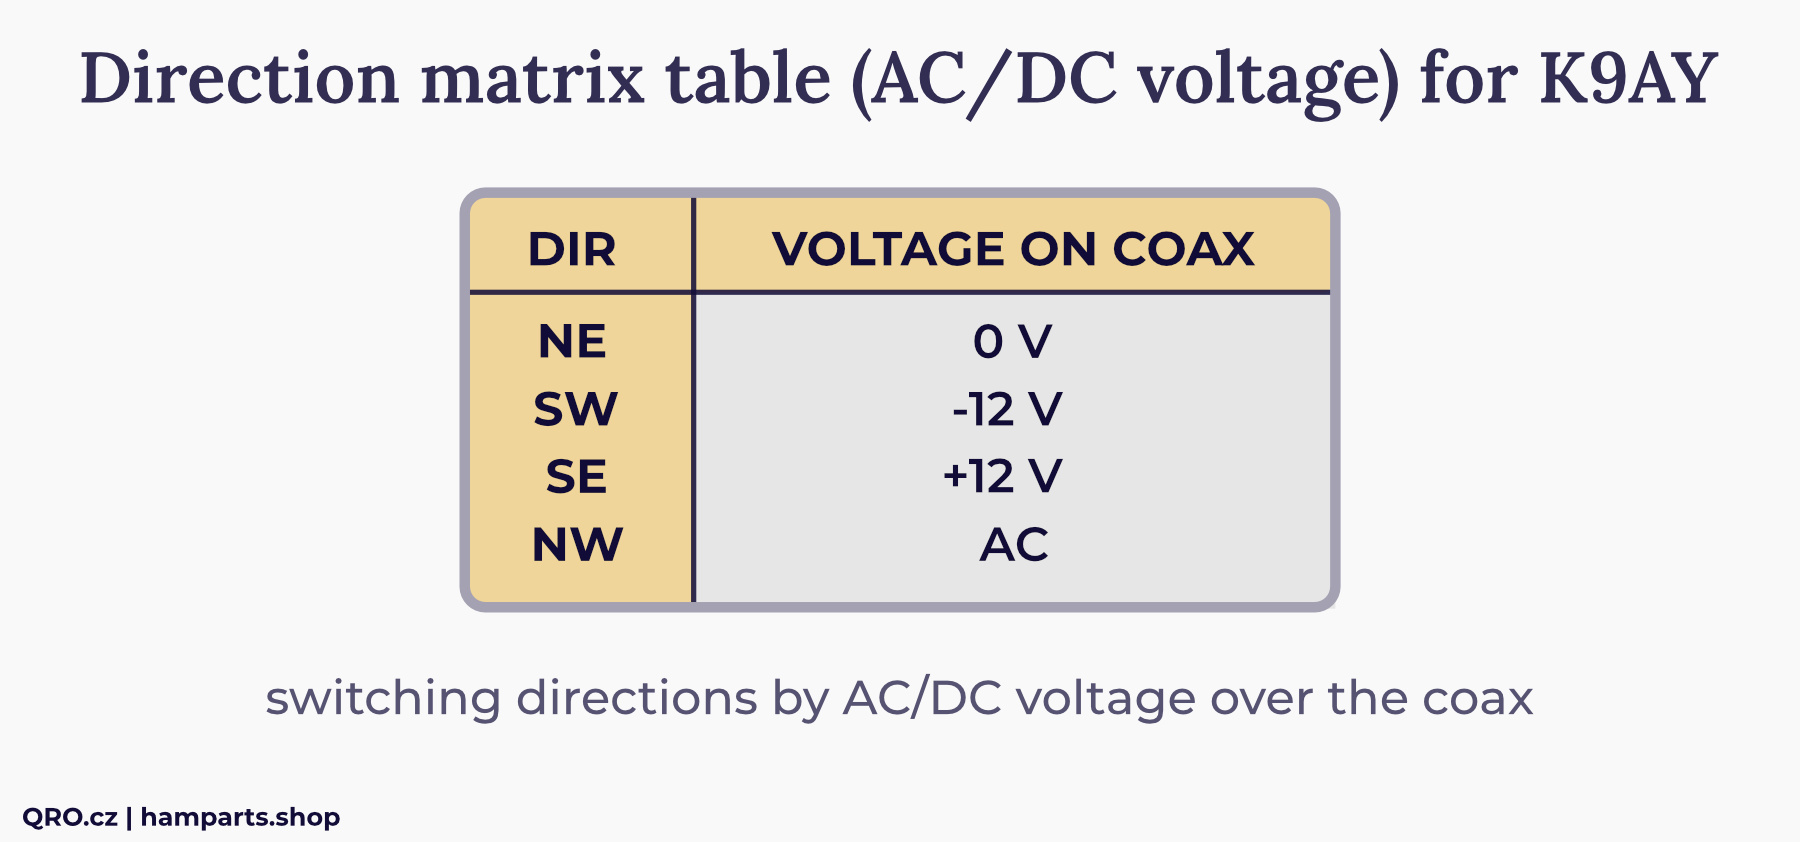 k9ay simply loops switch direction matrix table AC/DC qro.cz hamparts.shop